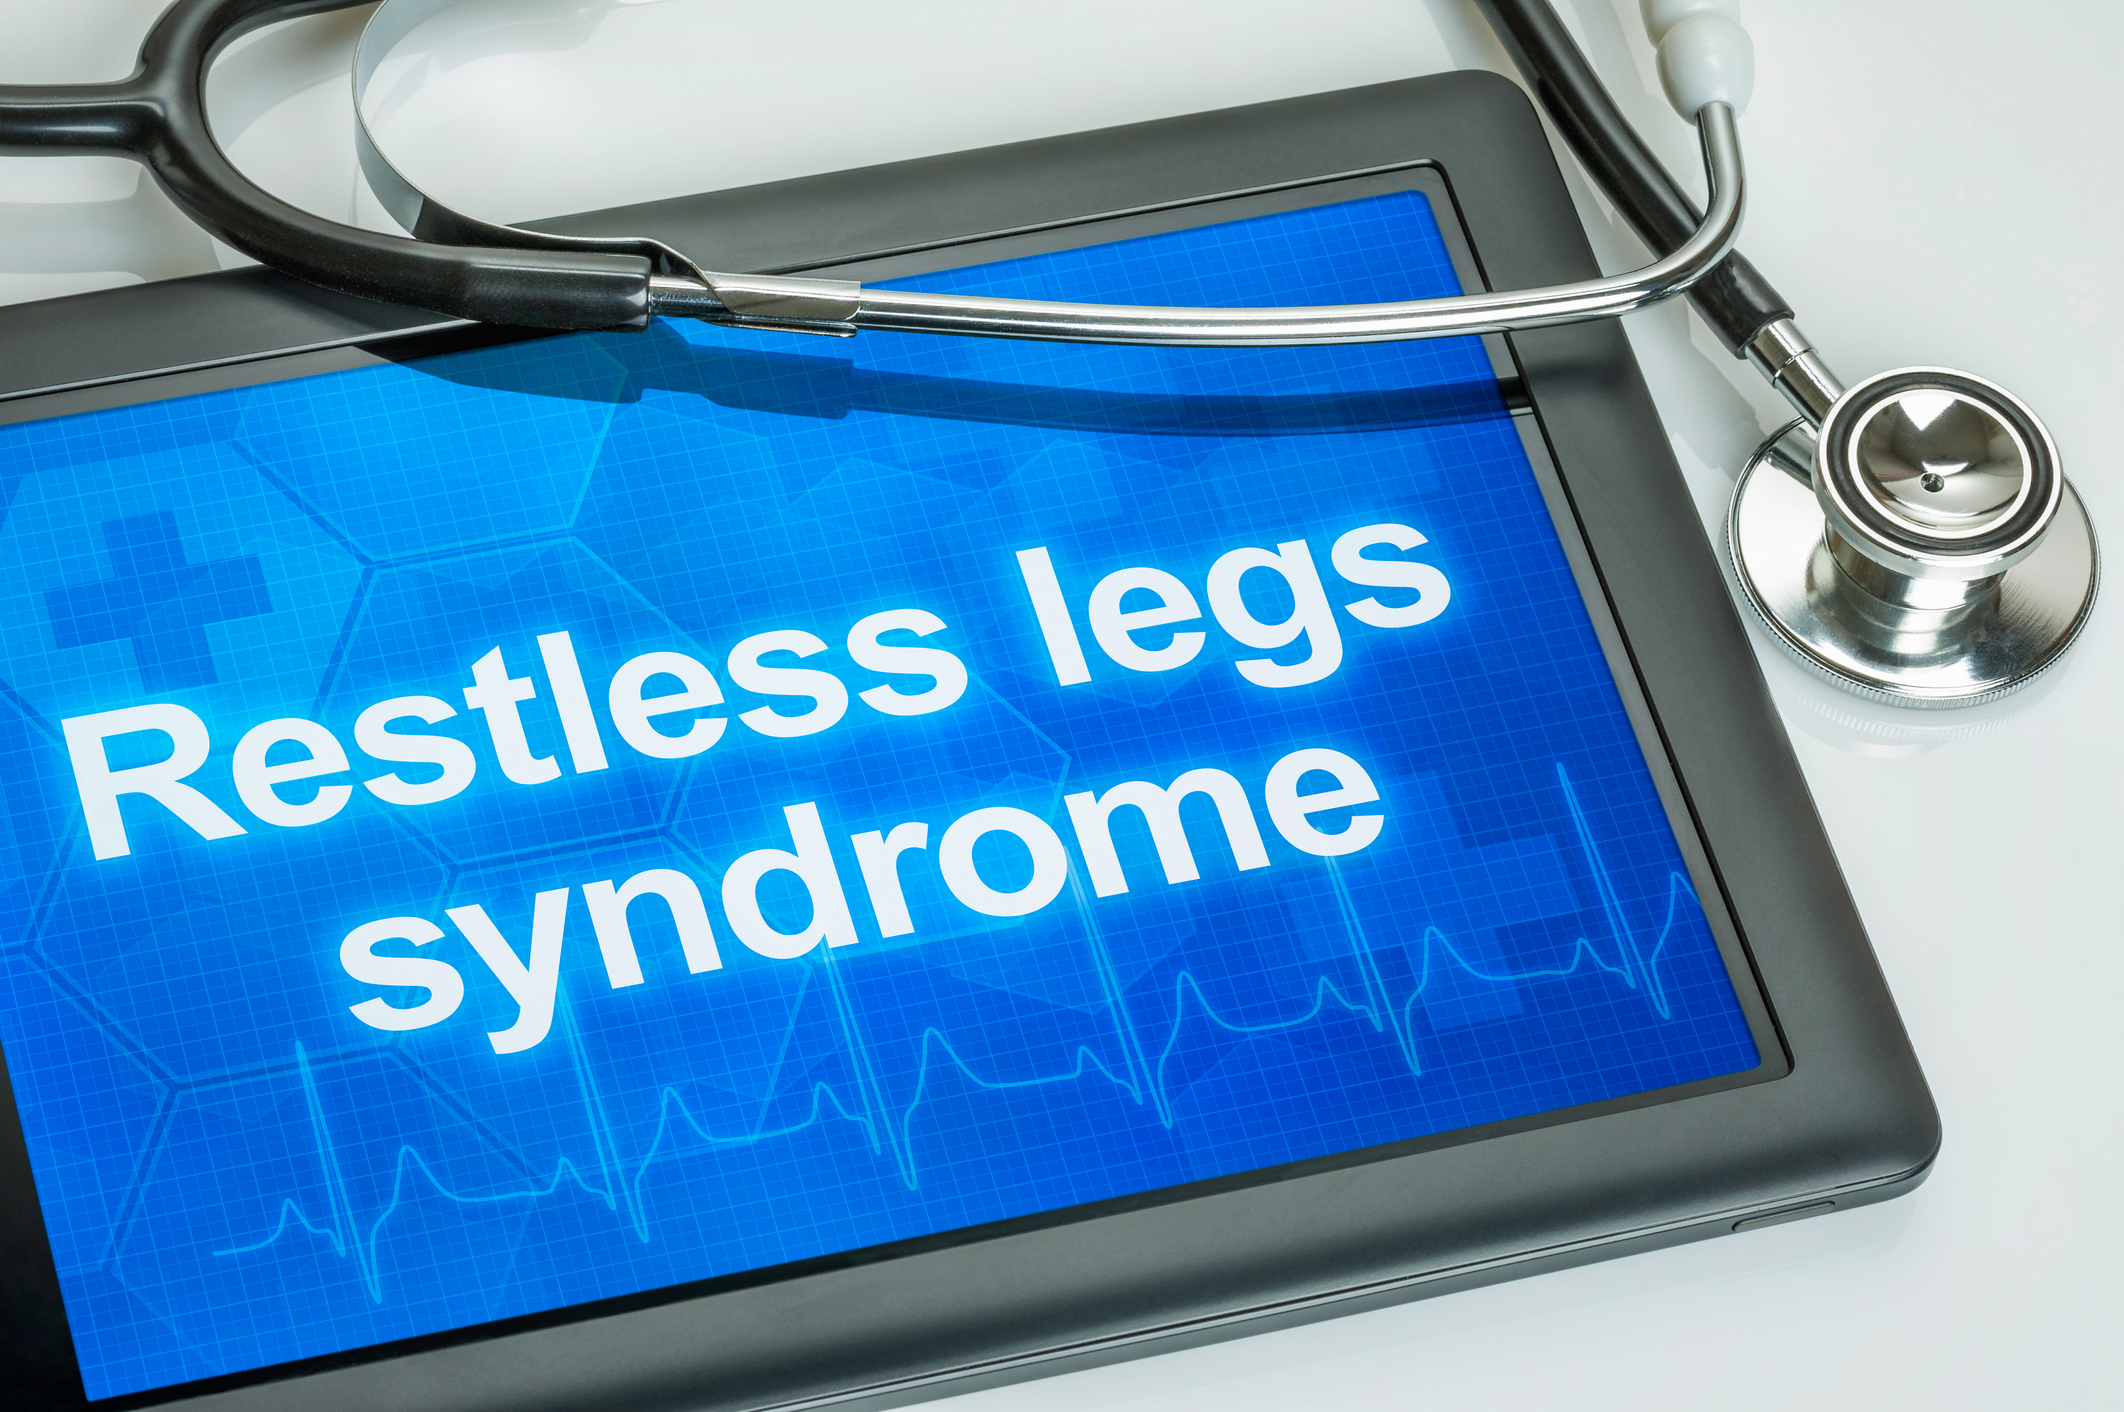 Restless legs syndrome: Mild nuisance or serious warning?